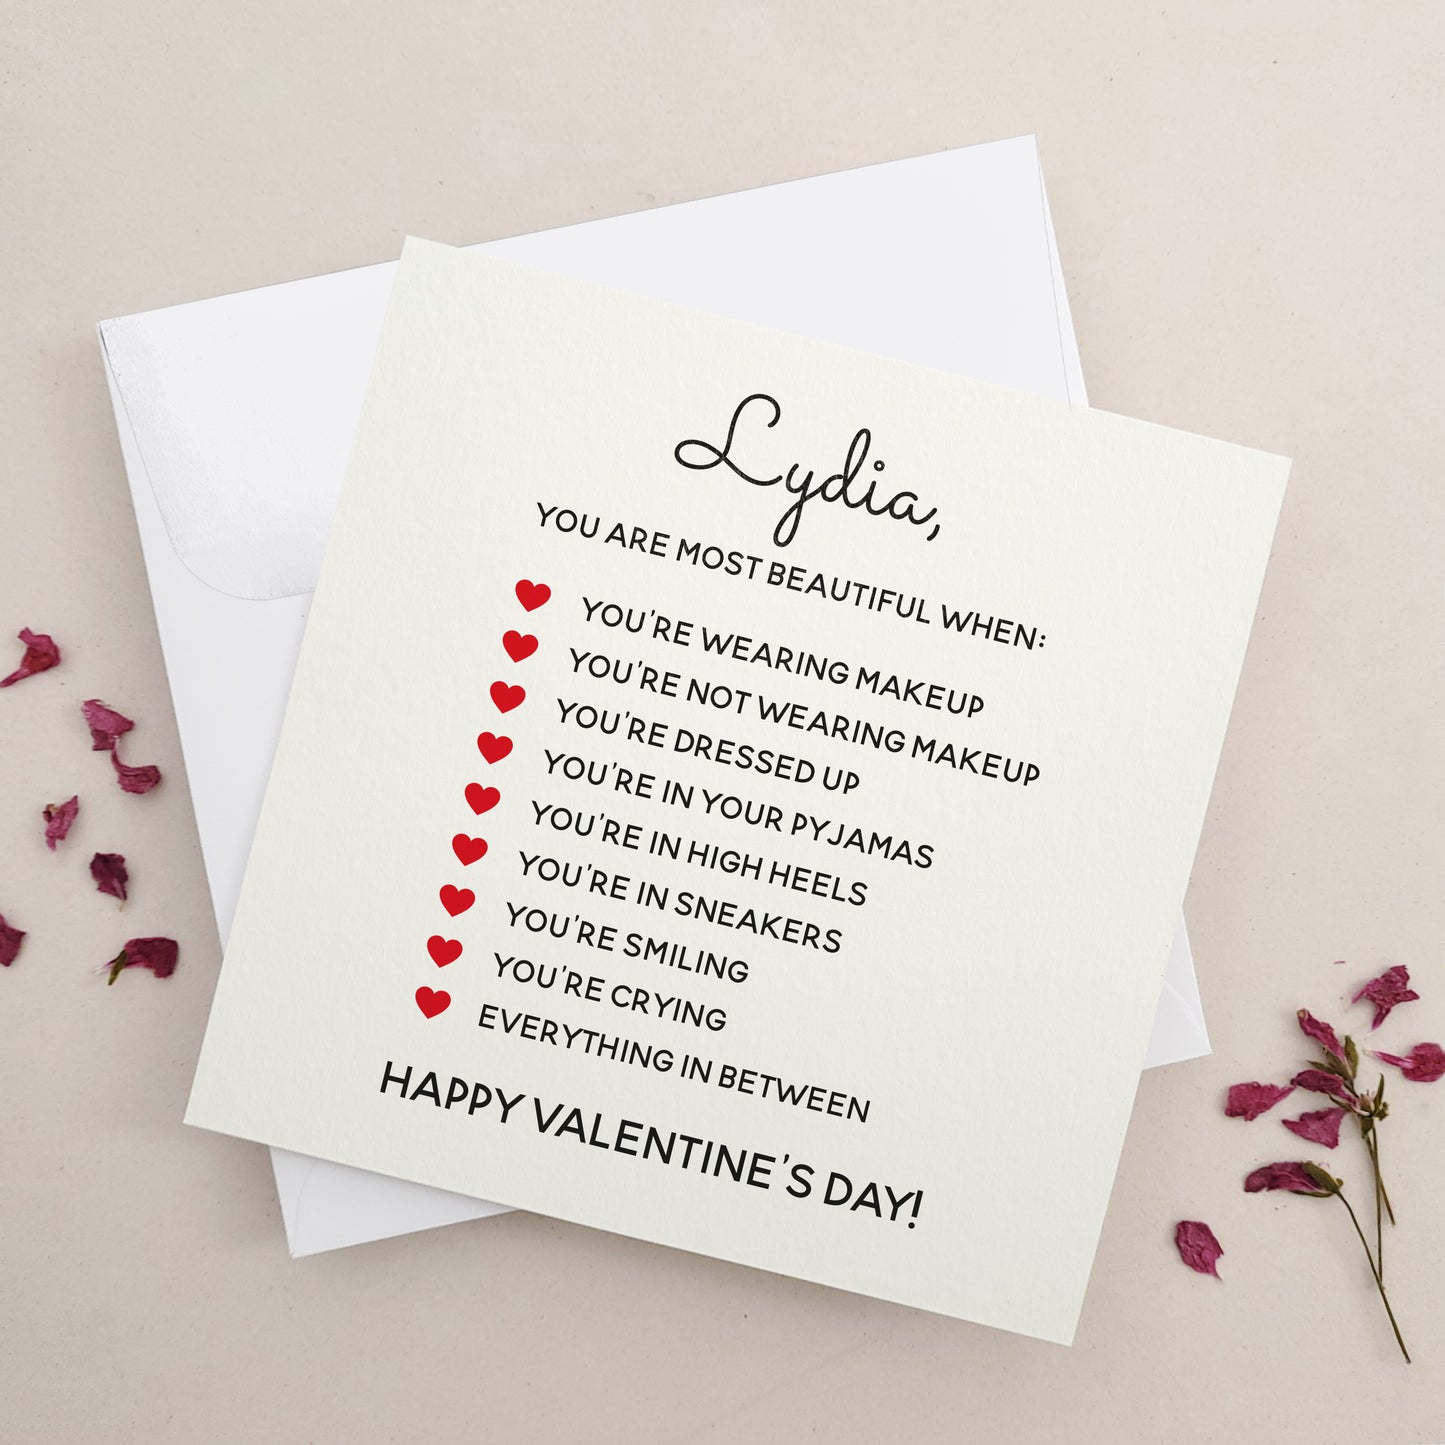 happy valentines day card for girlfiend or wife - XOXOKristen